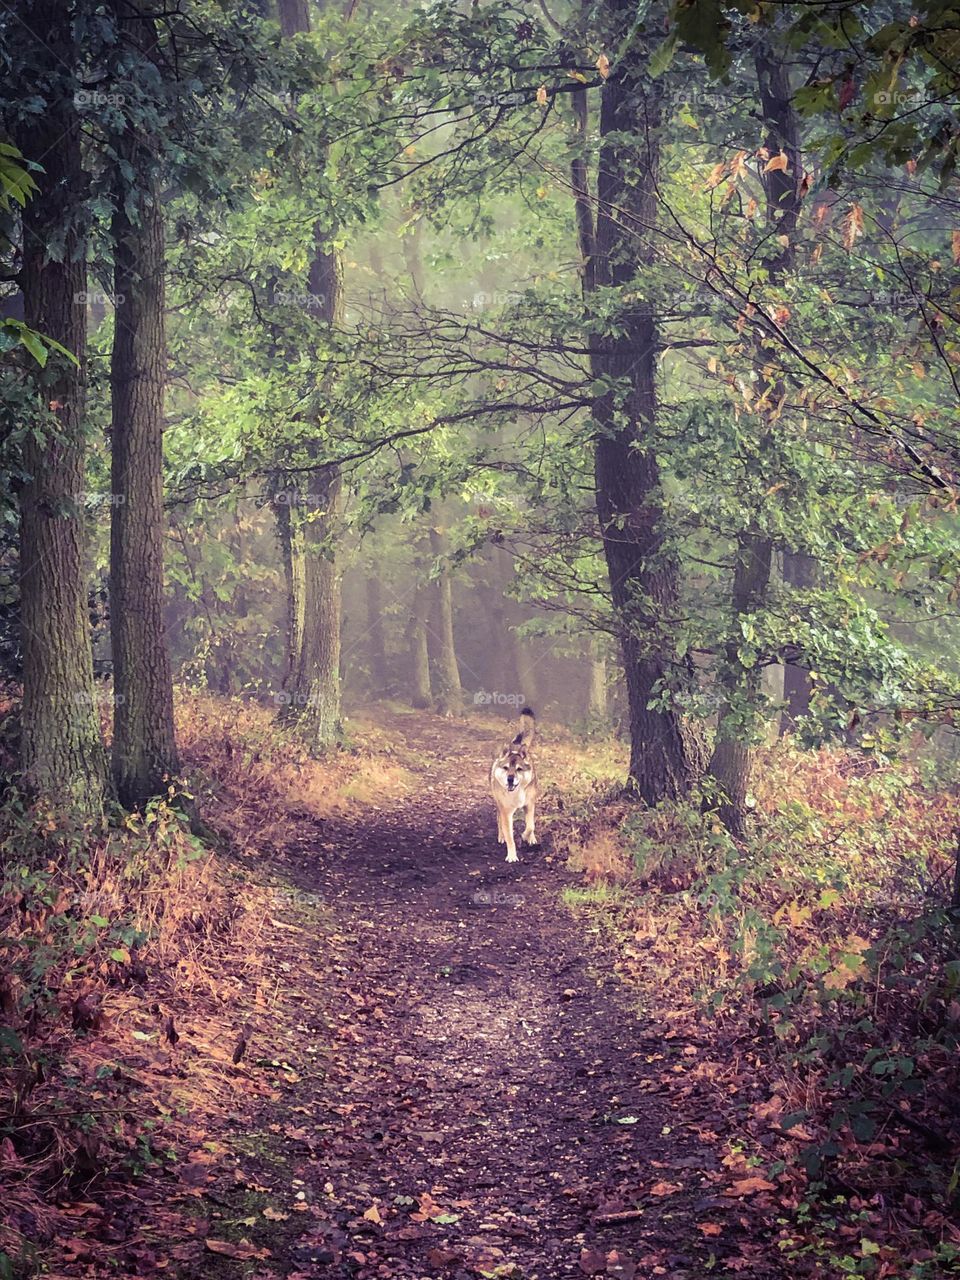  Wulf  Walking in the Autumn Forest Trail 